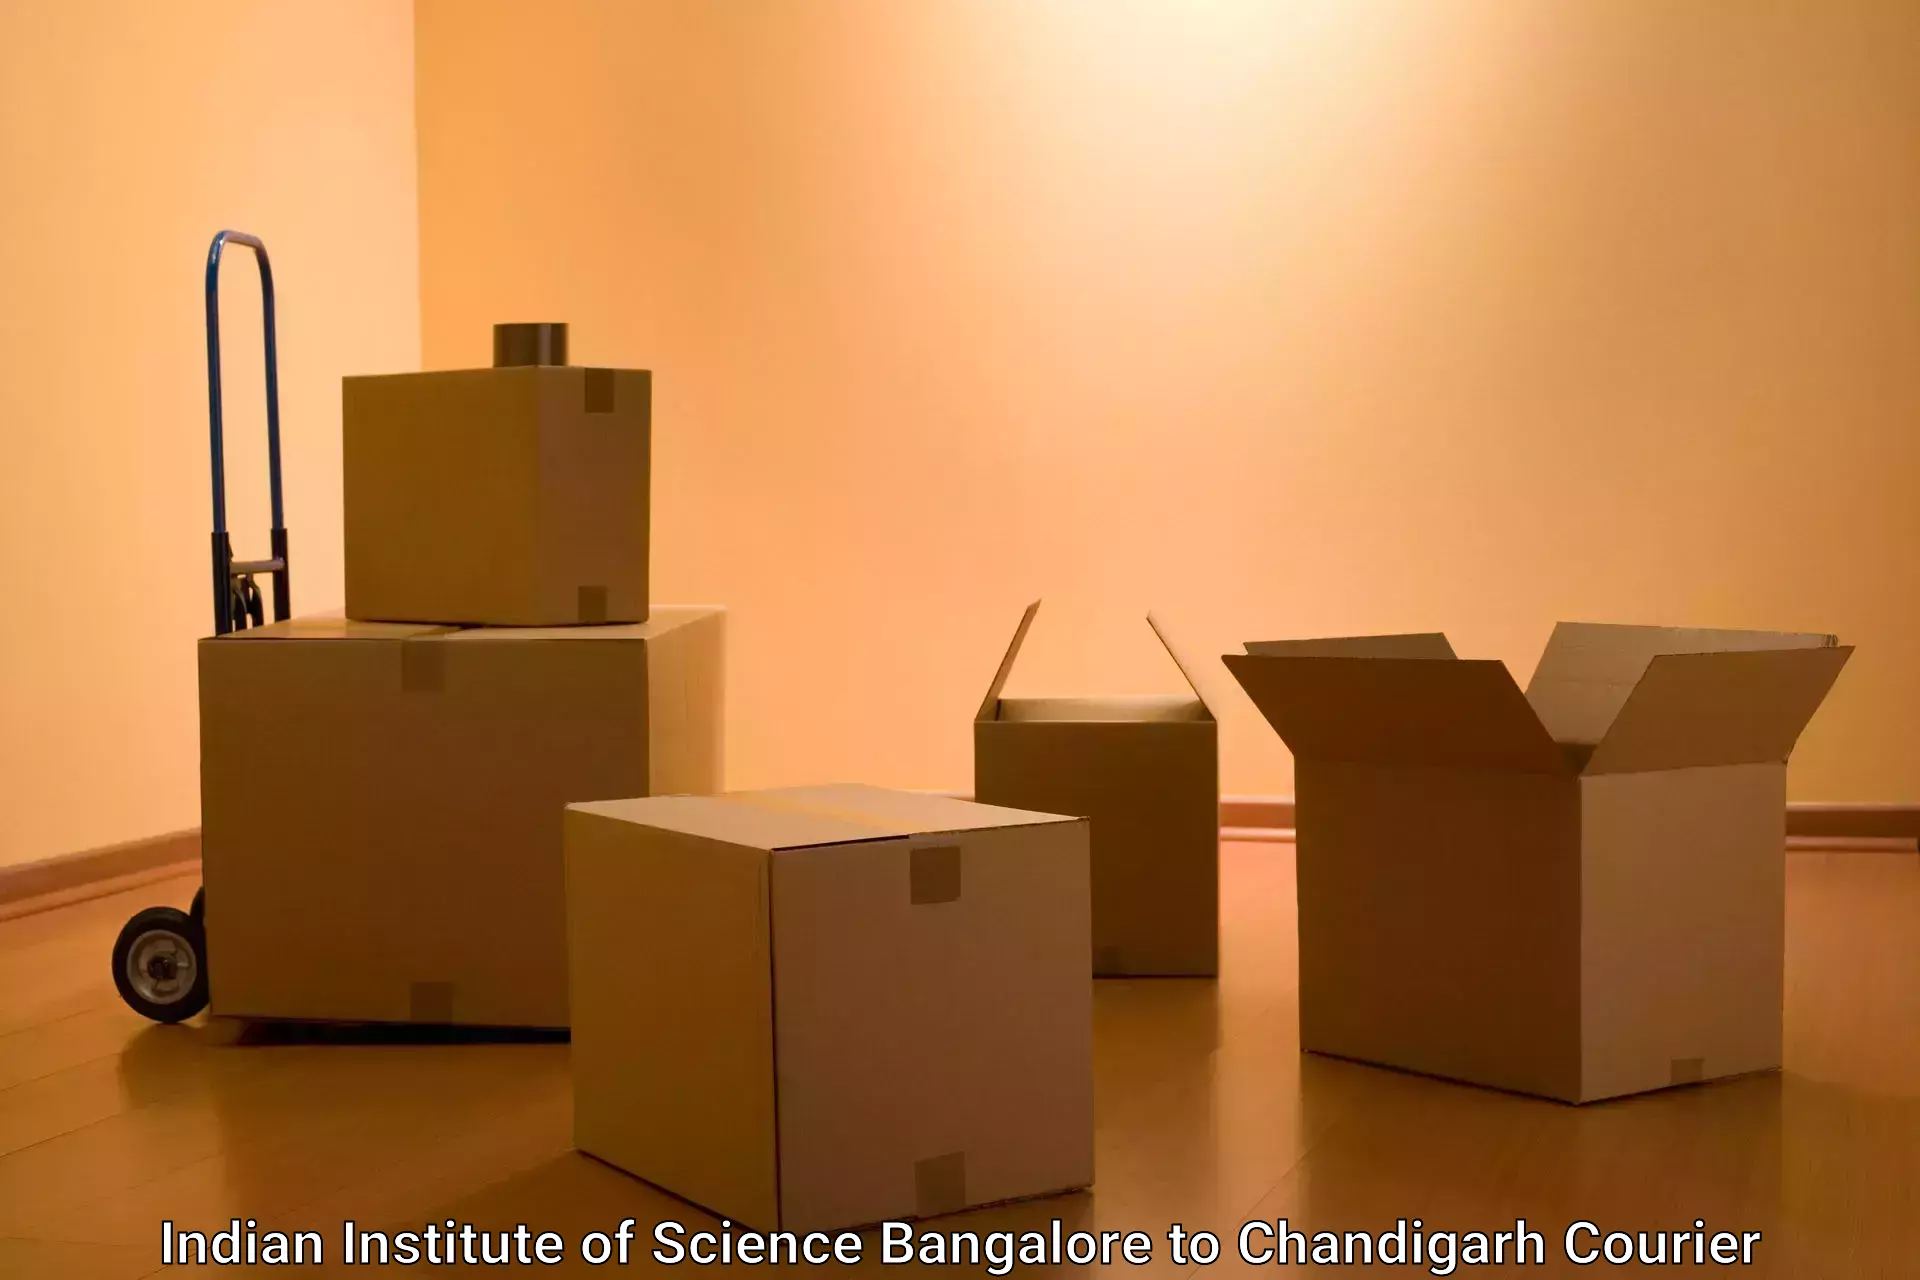 Fast-track shipping solutions in Indian Institute of Science Bangalore to Chandigarh